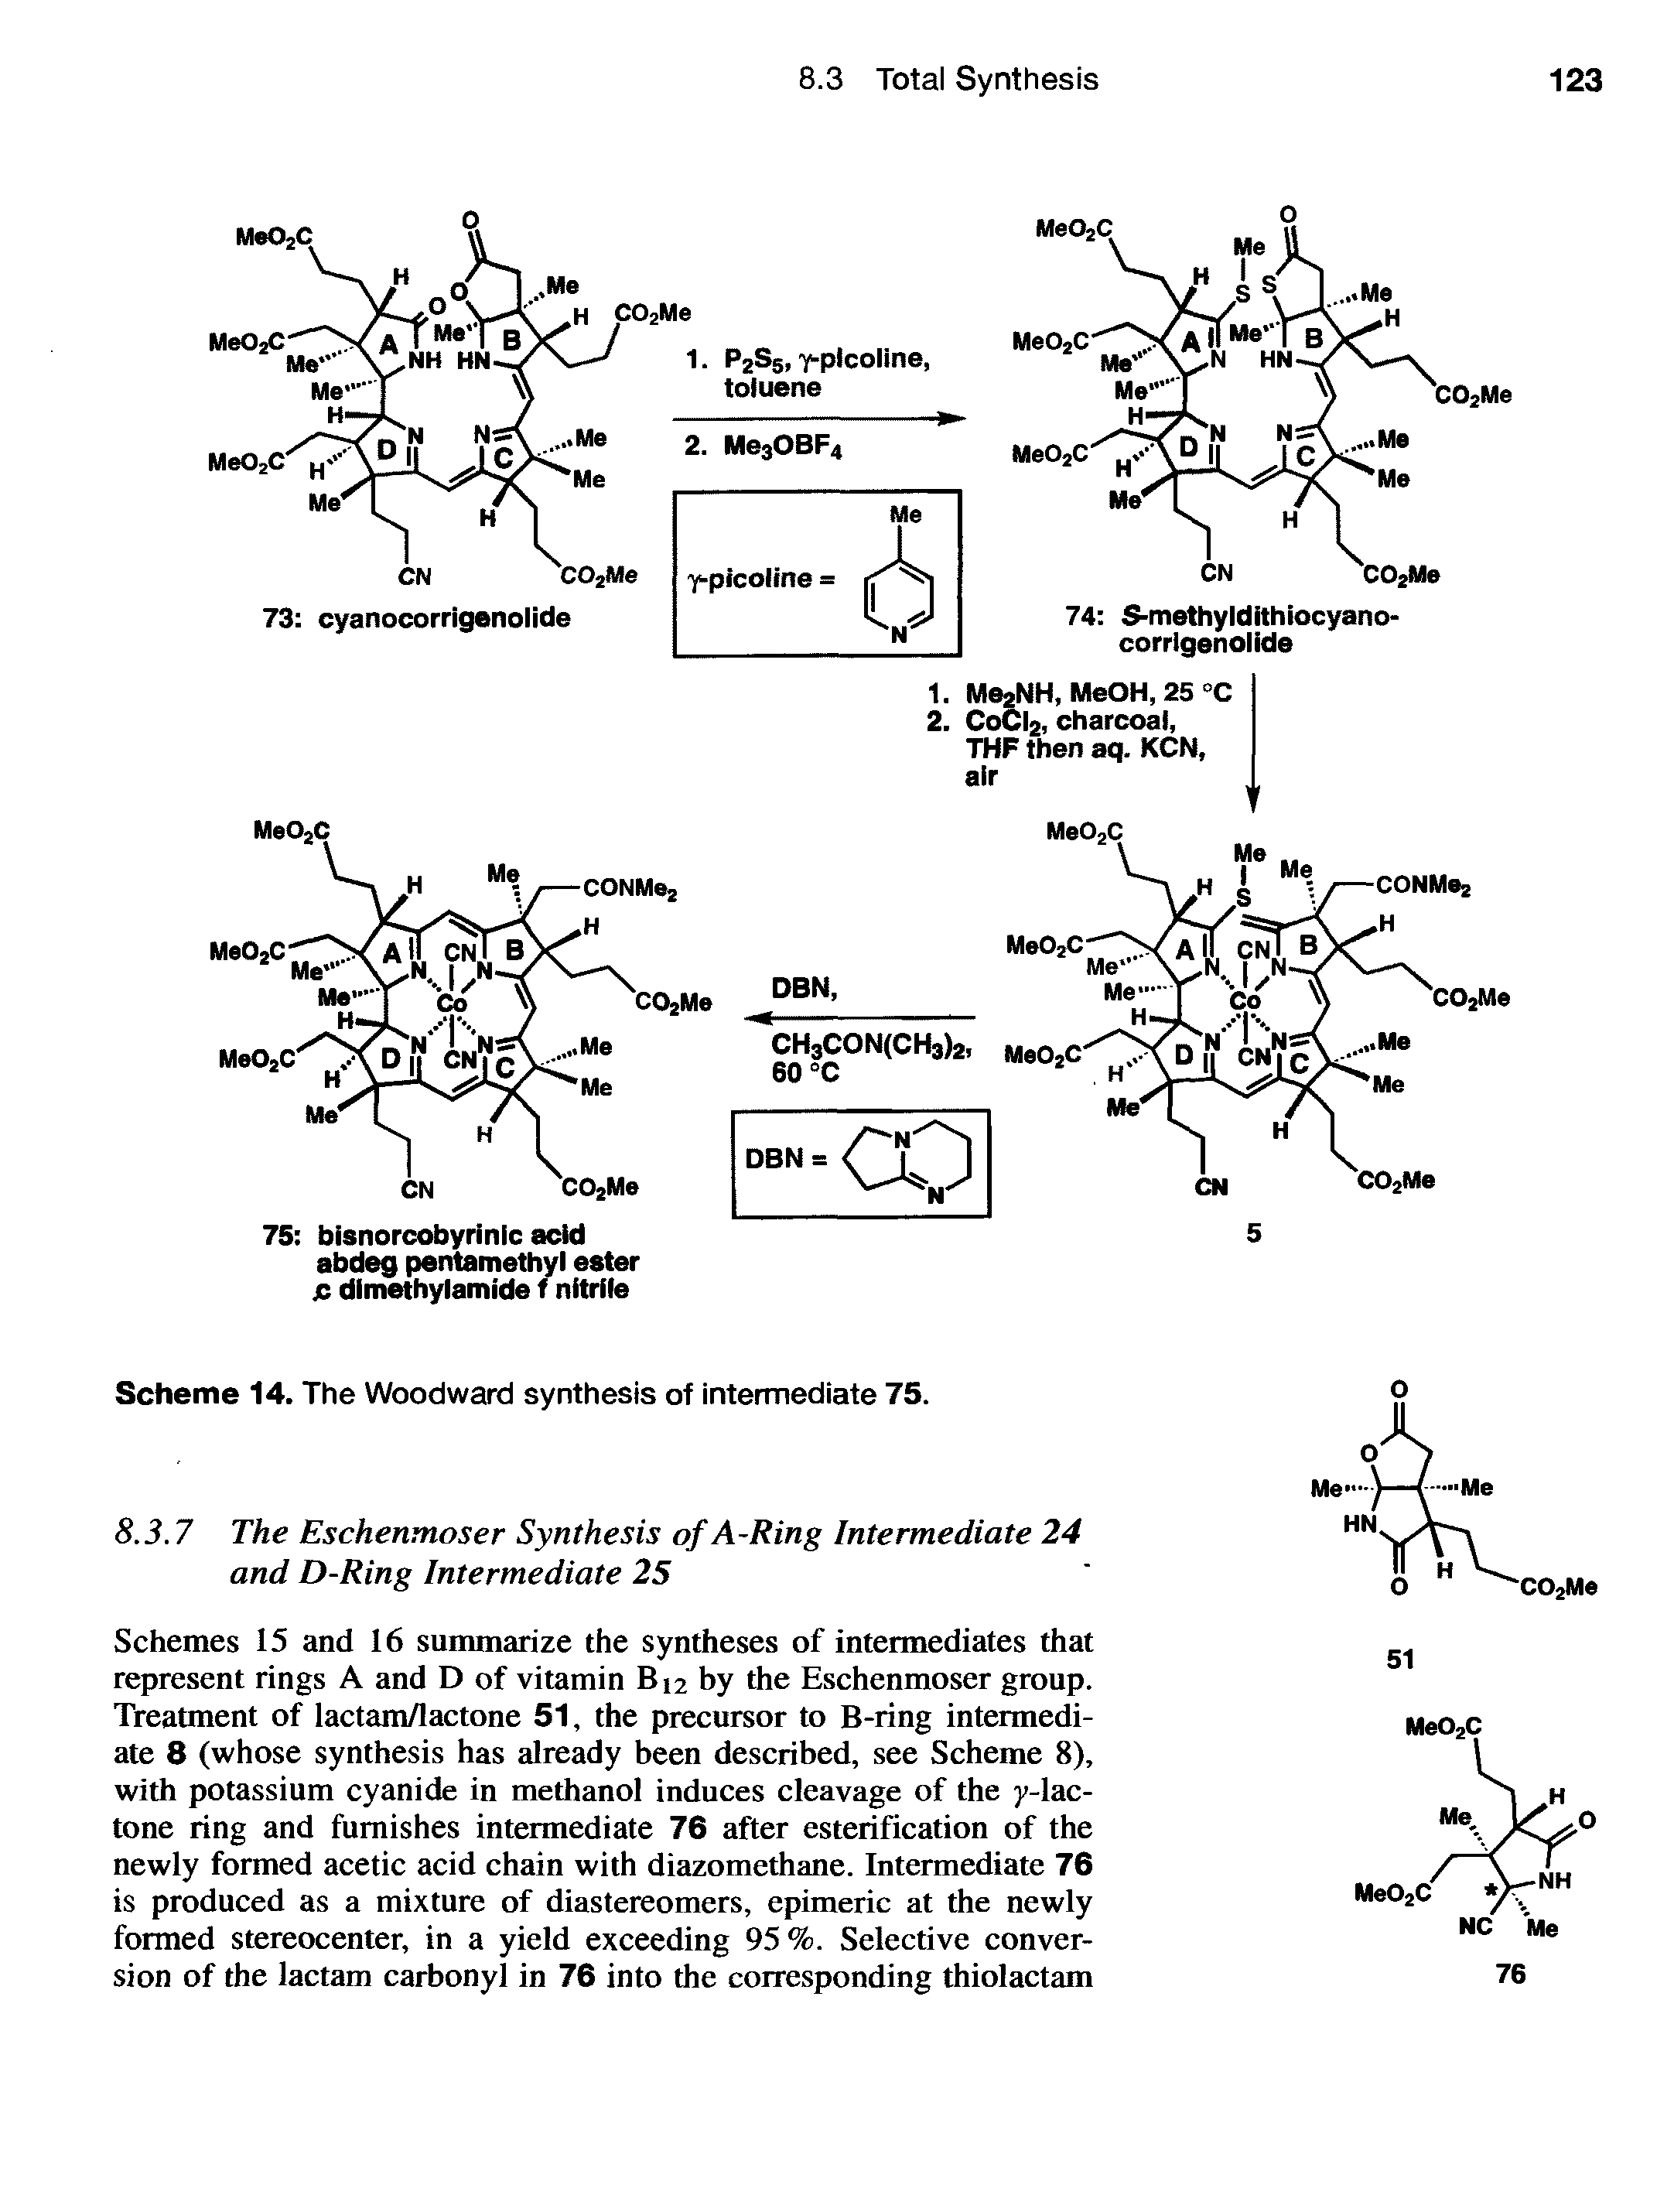 Schemes 15 and 16 summarize the syntheses of intermediates that represent rings A and D of vitamin Bi2 by the Eschenmoser group. Treatment of lactam/lactone 51, the precursor to B-ring intermediate 8 (whose synthesis has already been described, see Scheme 8), with potassium cyanide in methanol induces cleavage of the y-lac-tone ring and furnishes intermediate 76 after esterification of the newly formed acetic acid chain with diazomethane. Intermediate 76 is produced as a mixture of diastereomers, epimeric at the newly formed stereocenter, in a yield exceeding 95%. Selective conversion of the lactam carbonyl in 76 into the corresponding thiolactam...